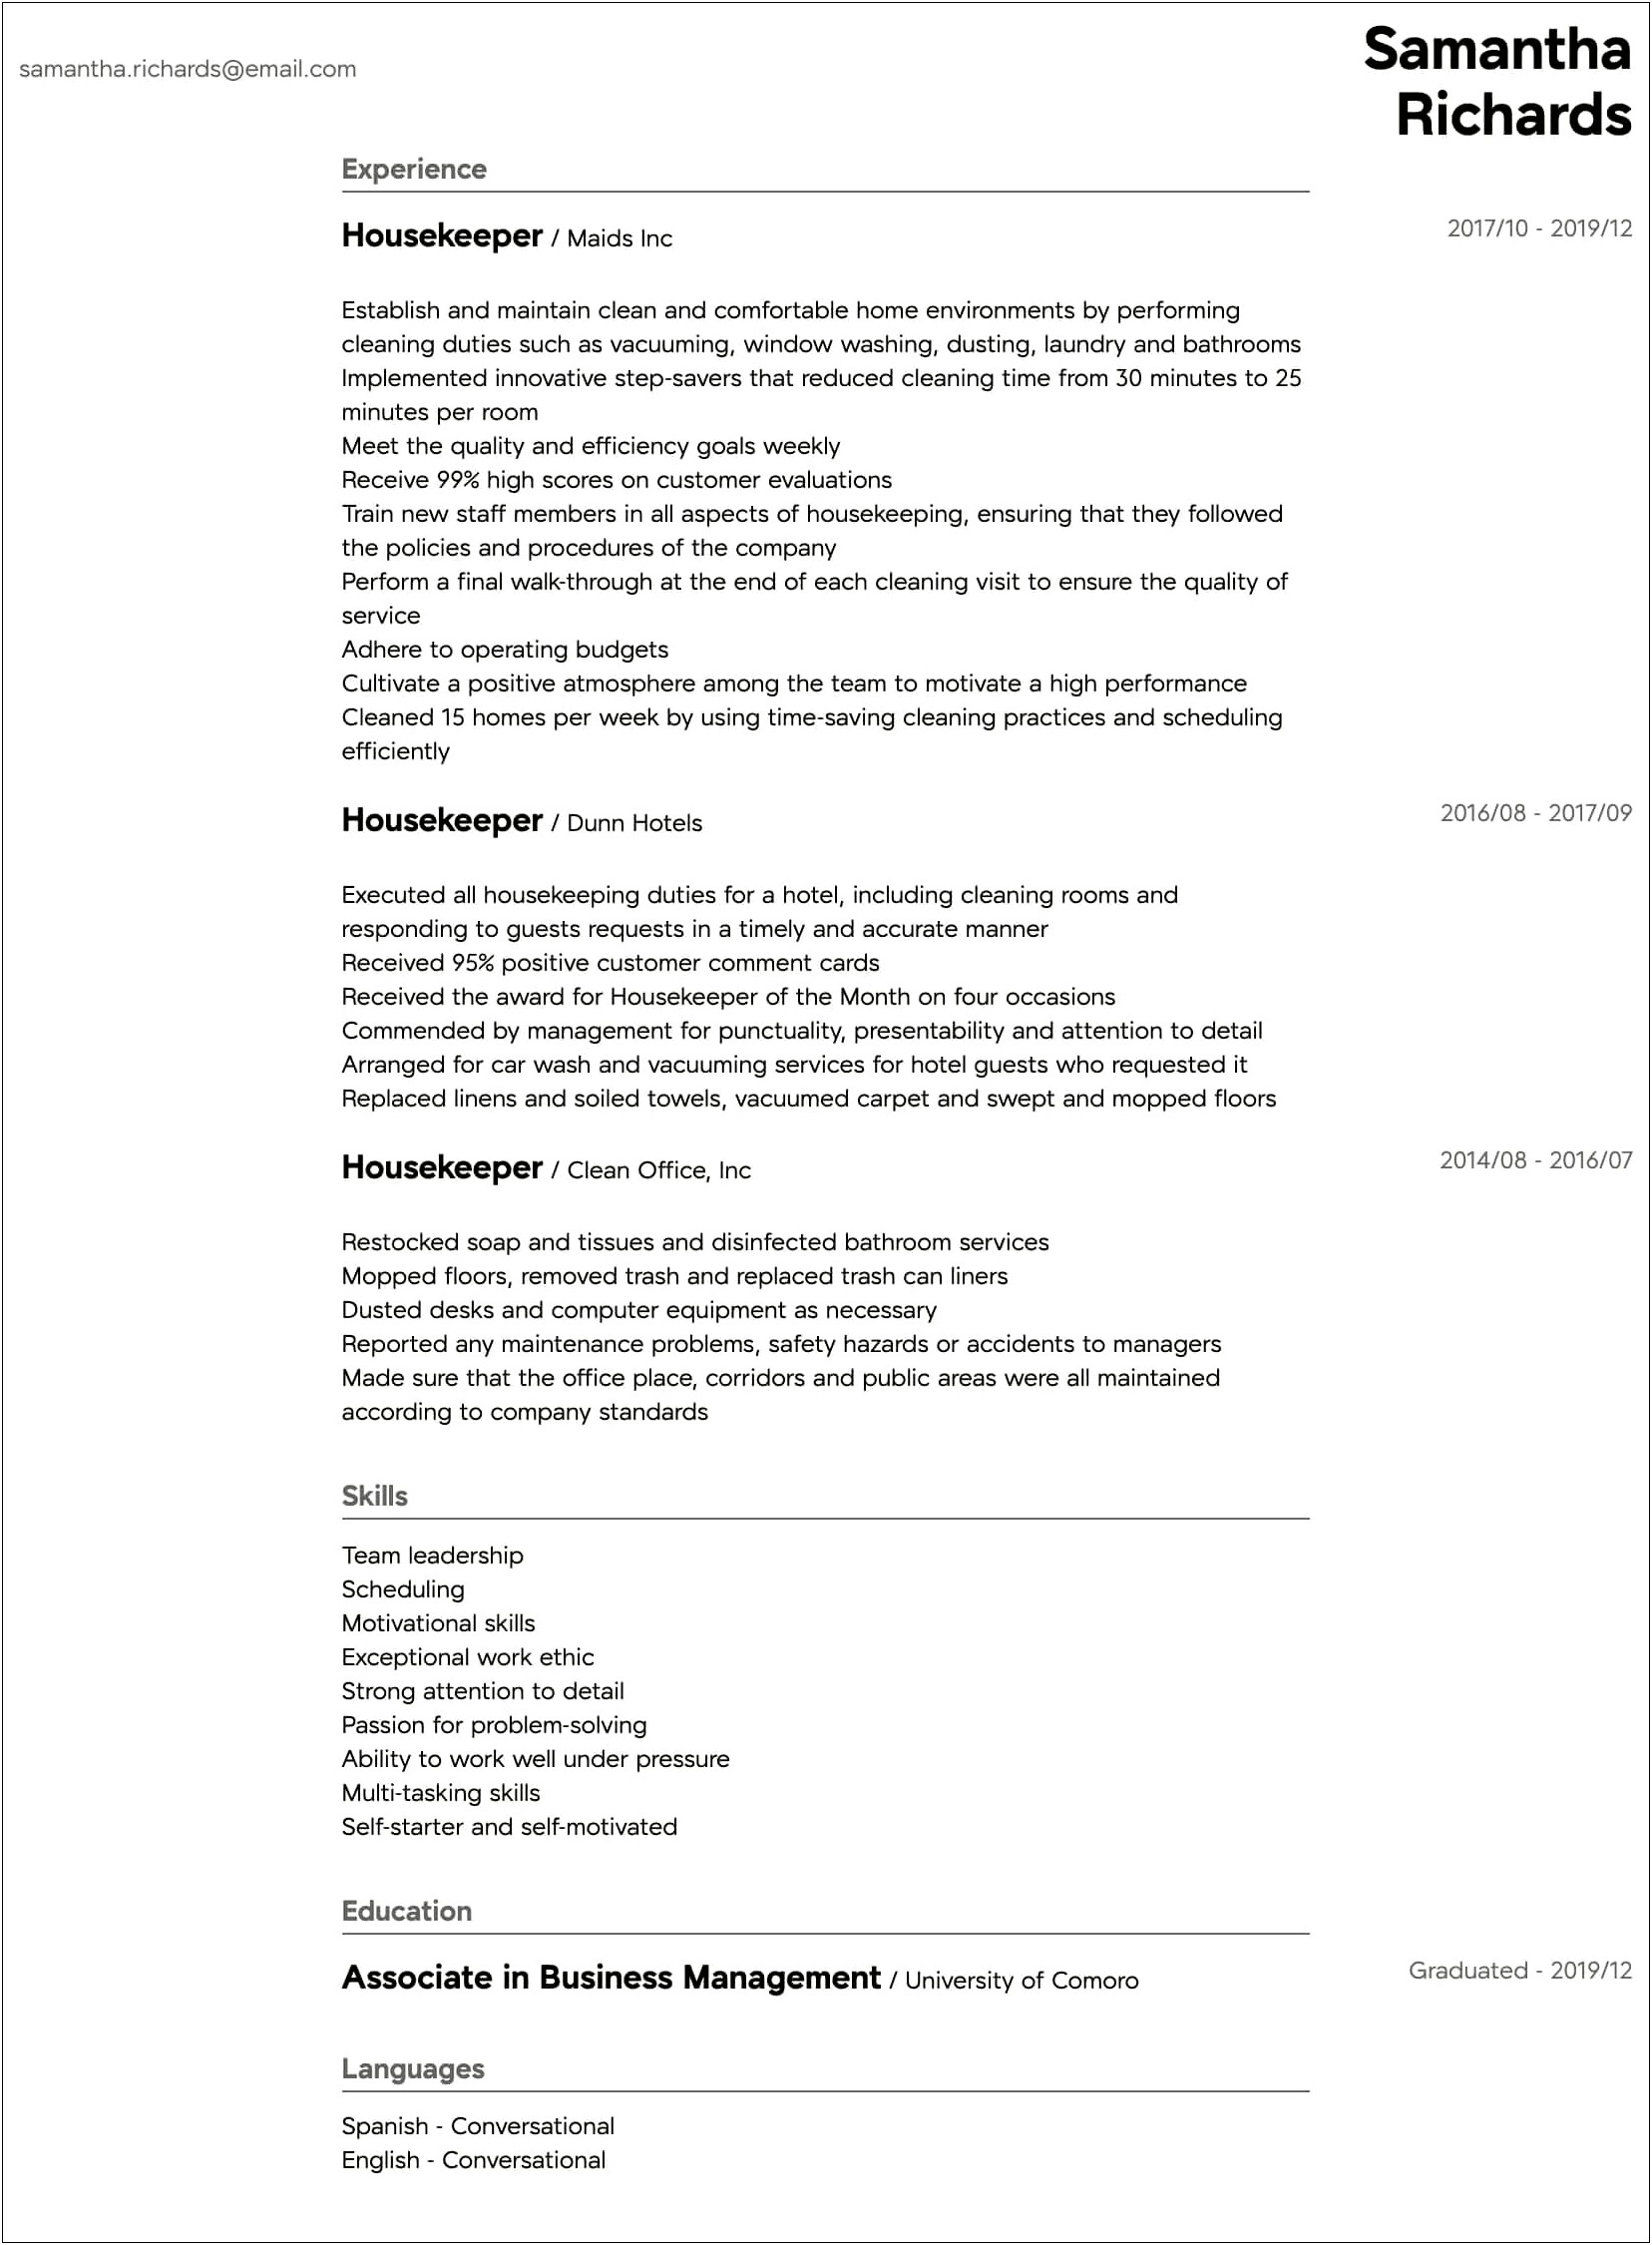 Skills And Qualifications For Room Attendant Resume